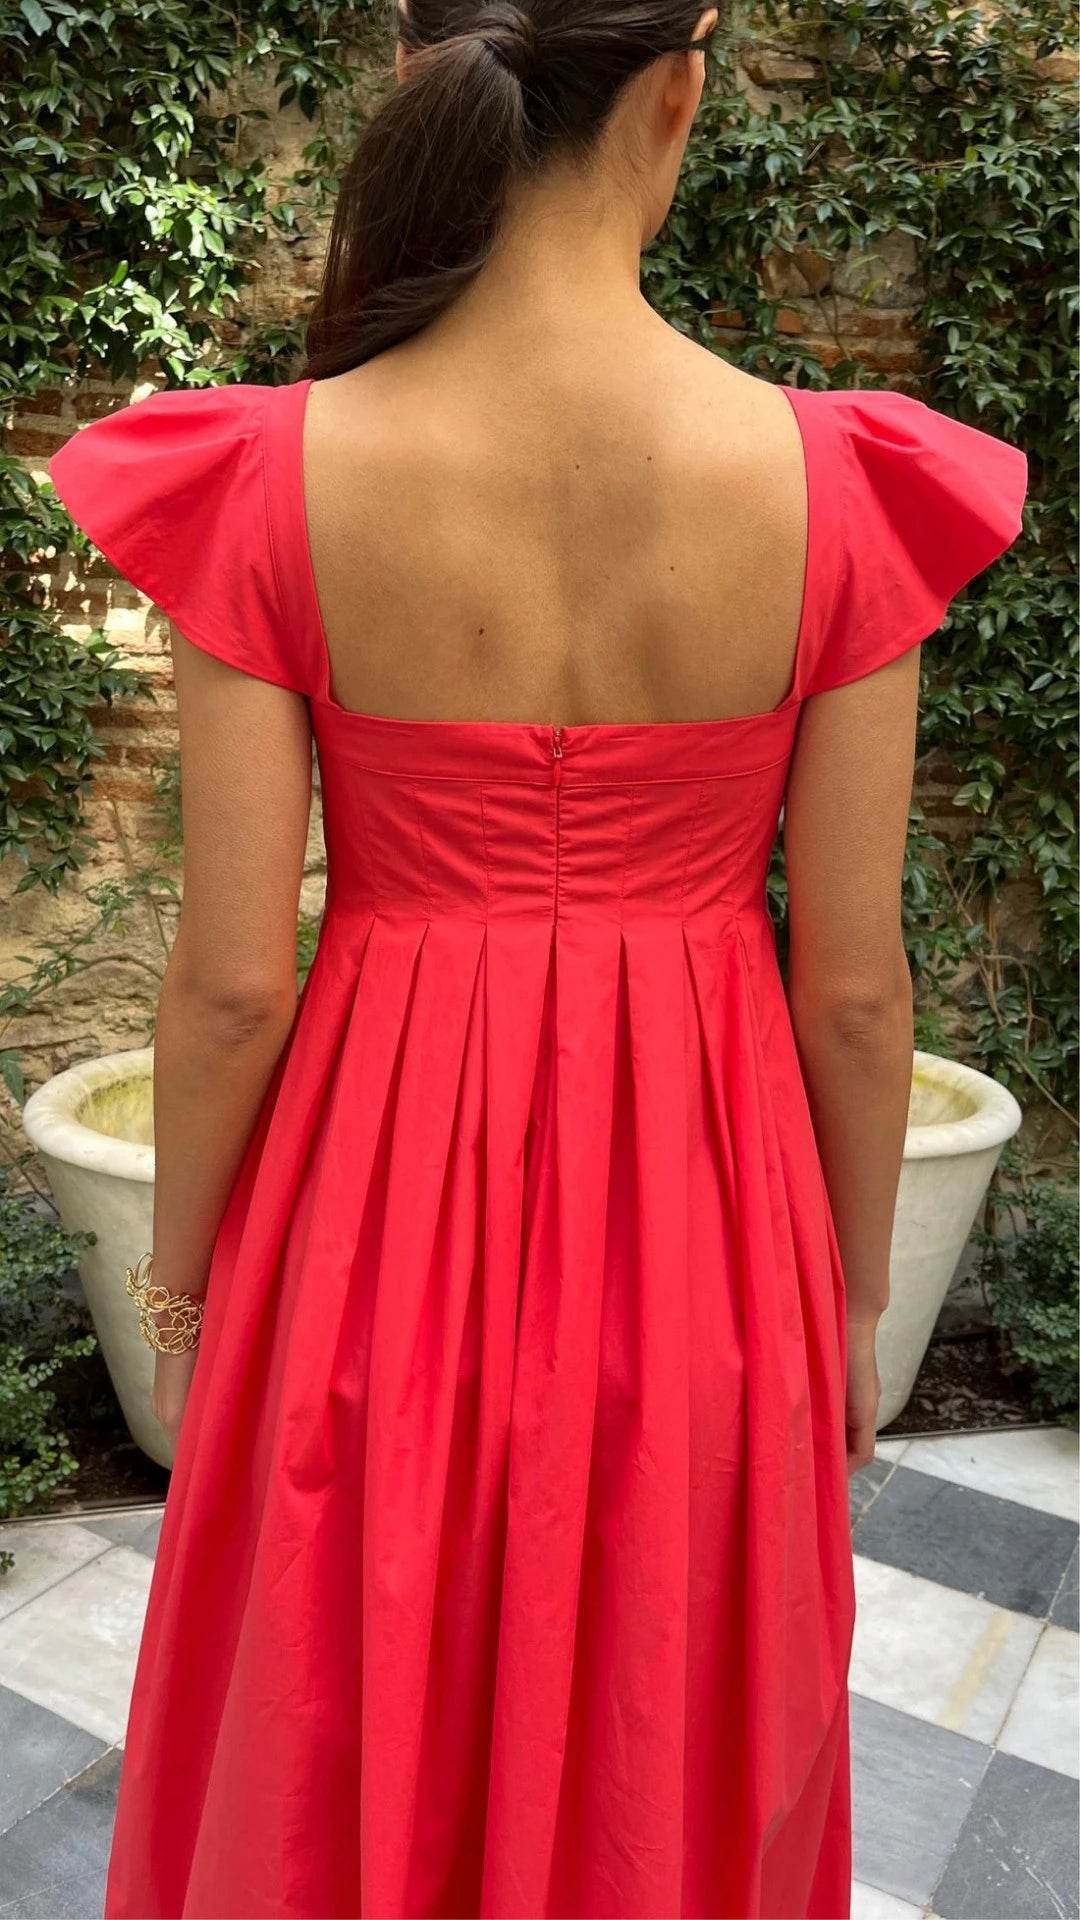 Rochas Paris Empire Waist Cotton Poplin Dress. Sweet with capped sleeves and a square neckline. The fitted body gives way to an a-line skirt. Red cotton poplin summer style. Shown on the model facing to the back and showing the hidden zipper detail..